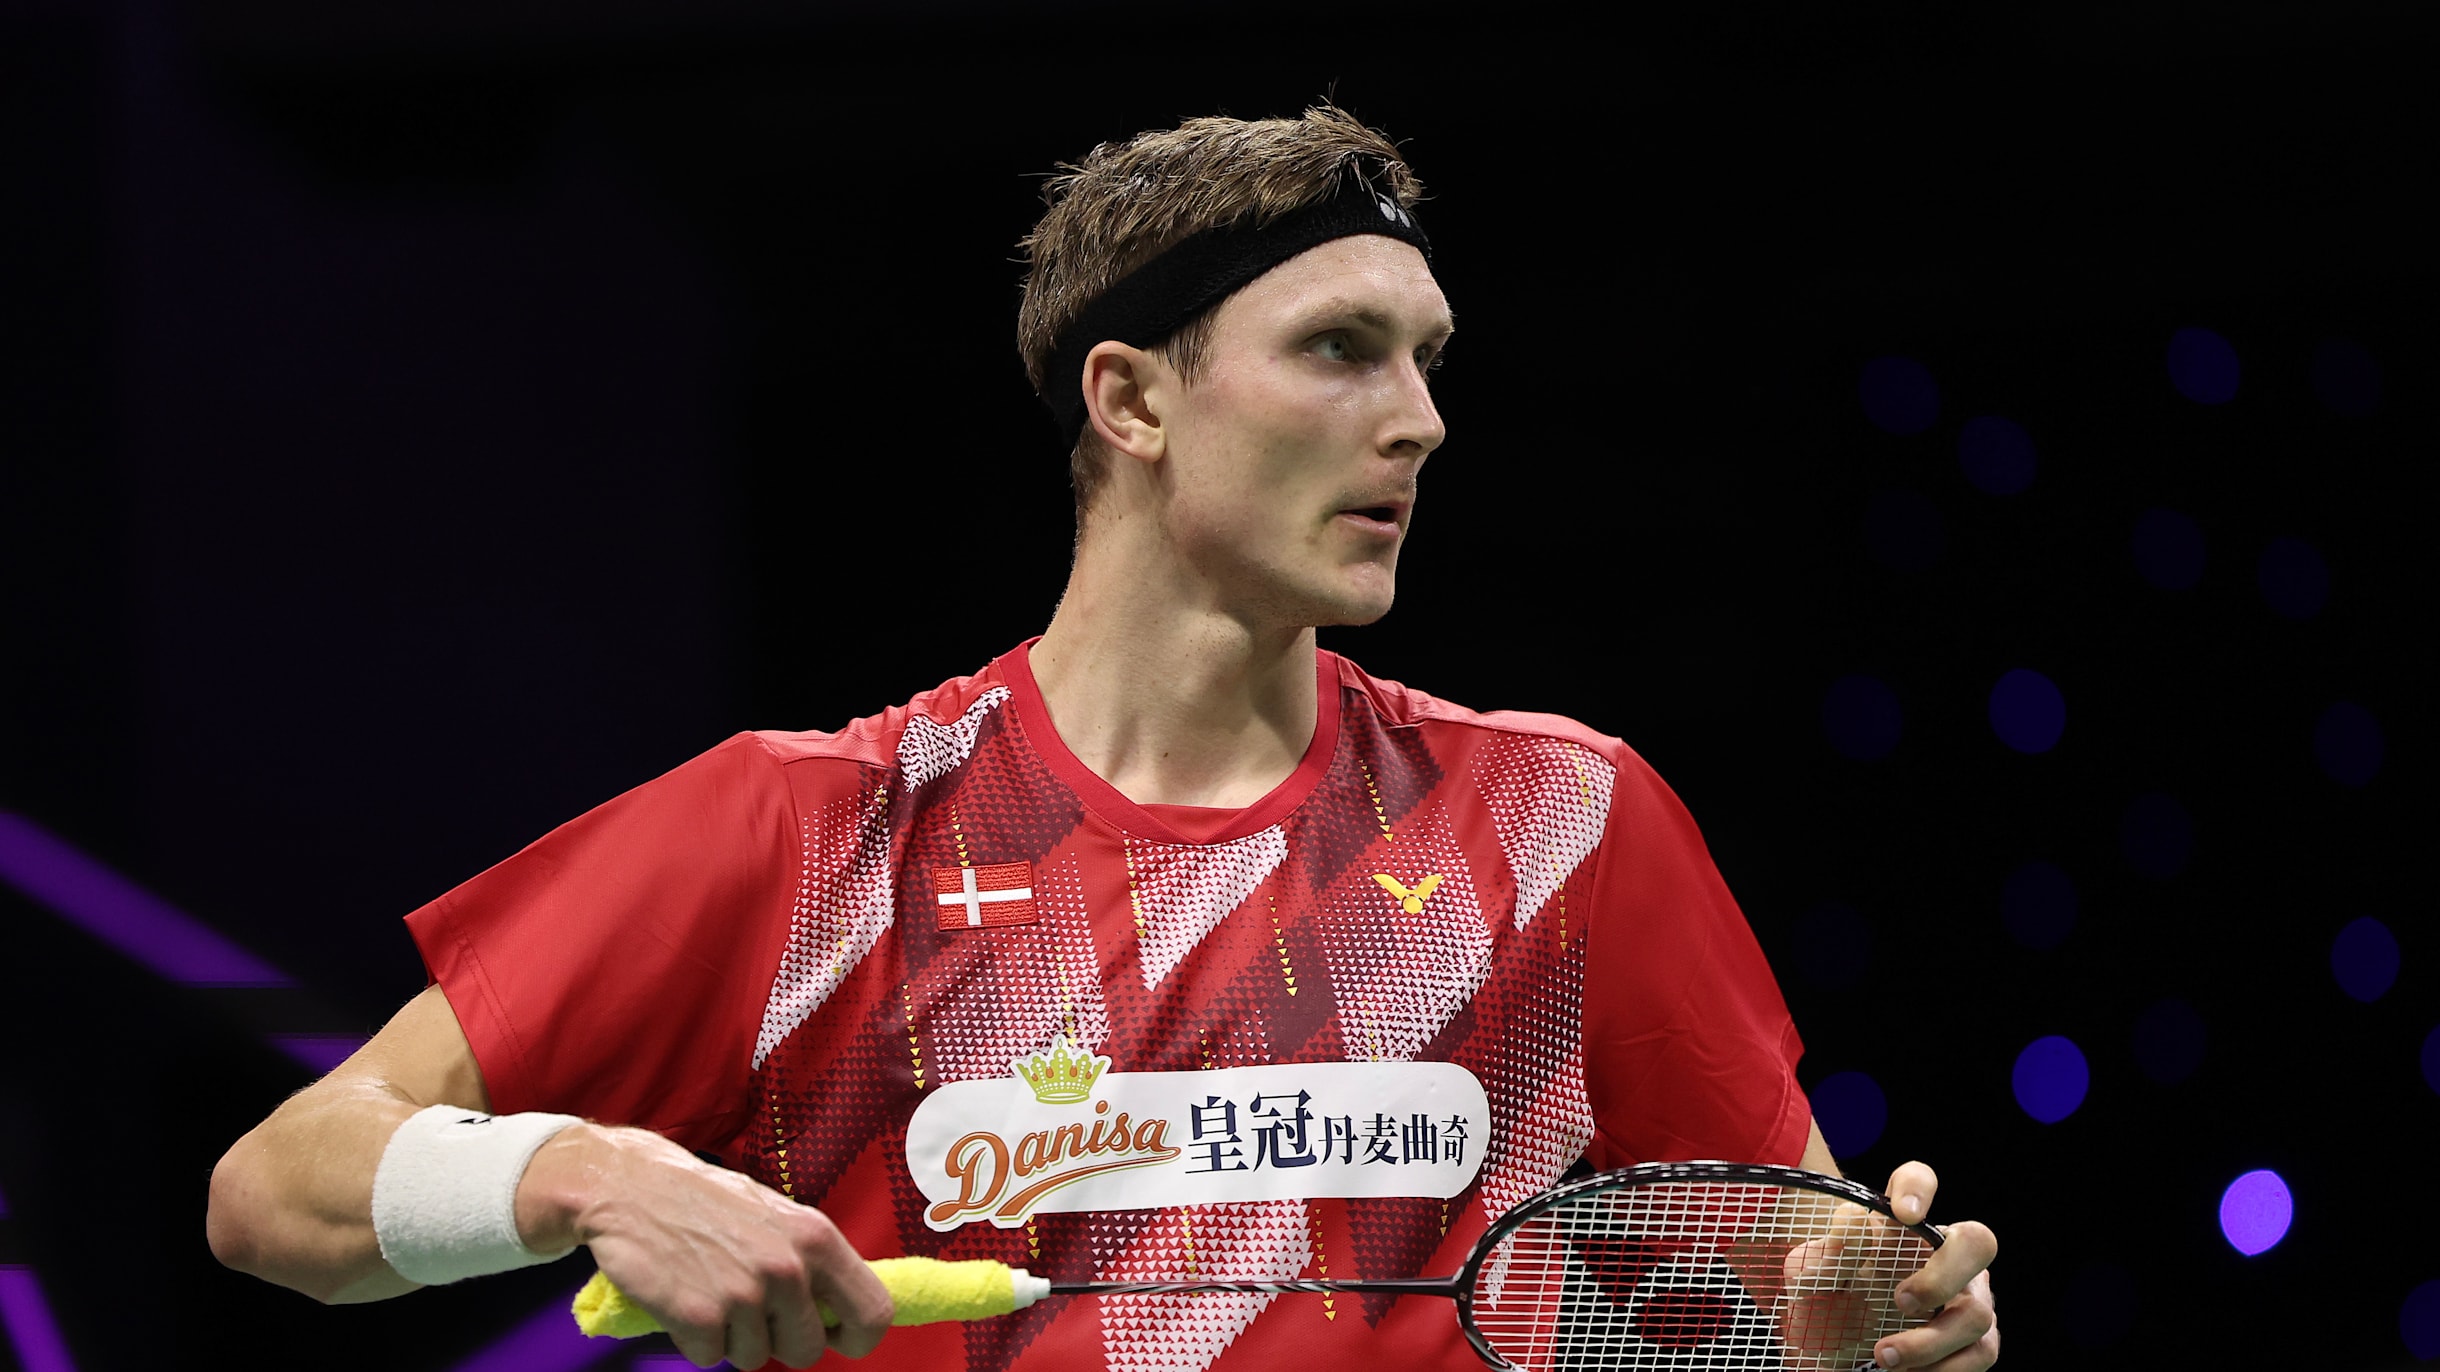 2023 BWF Sudirman Cup Finals Day 6 - Axelsen retires from clash with Lee Zii Jia as semi-final spots are won